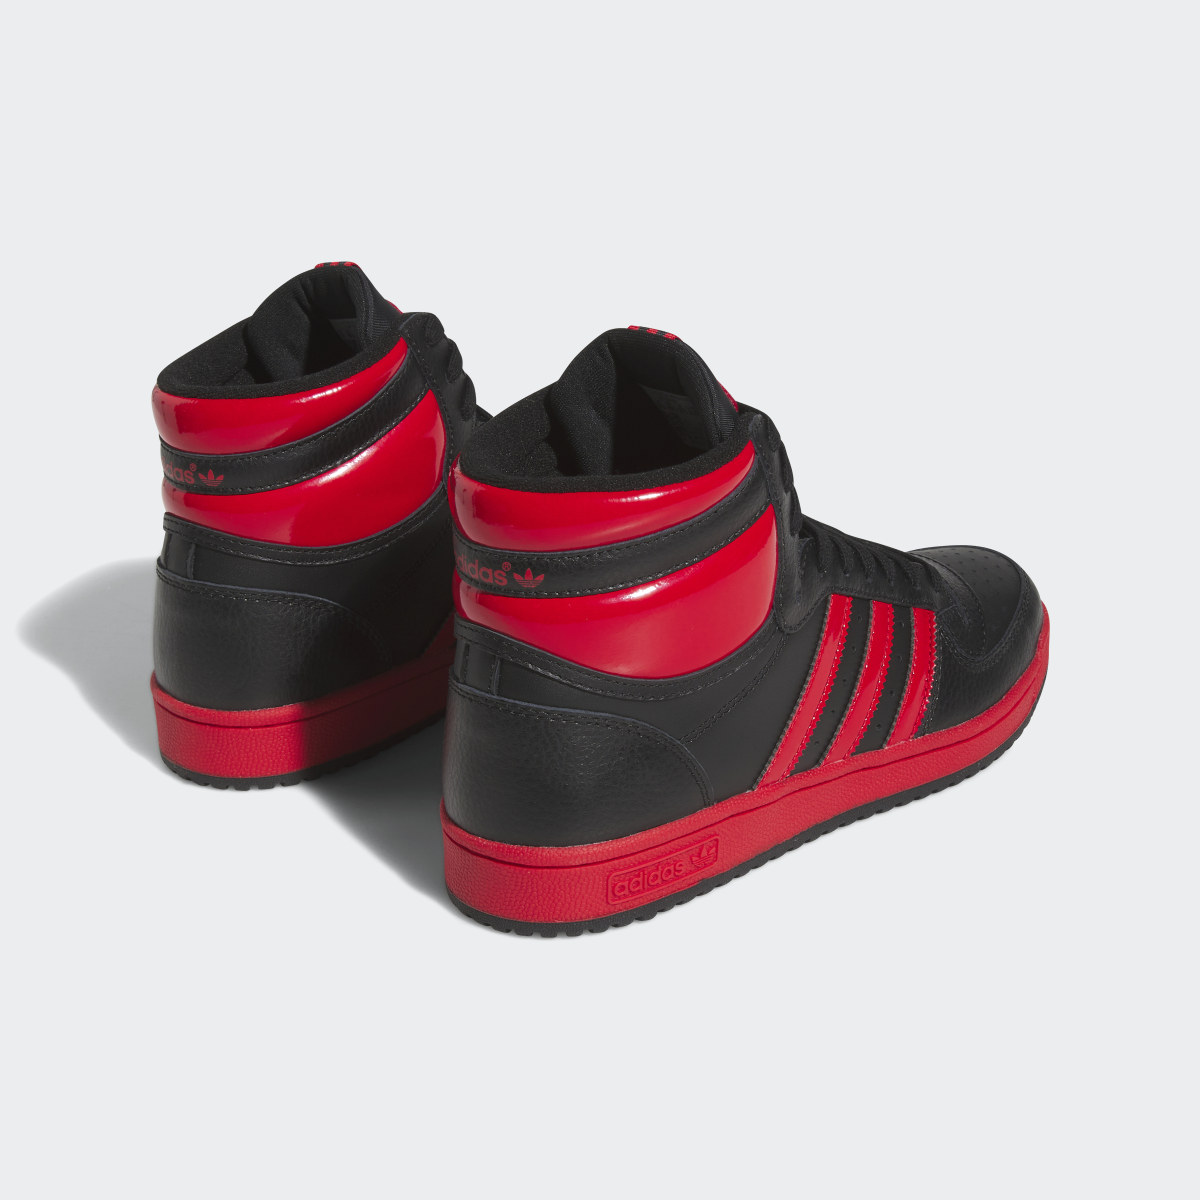 Adidas Top Ten RB Shoes. 6